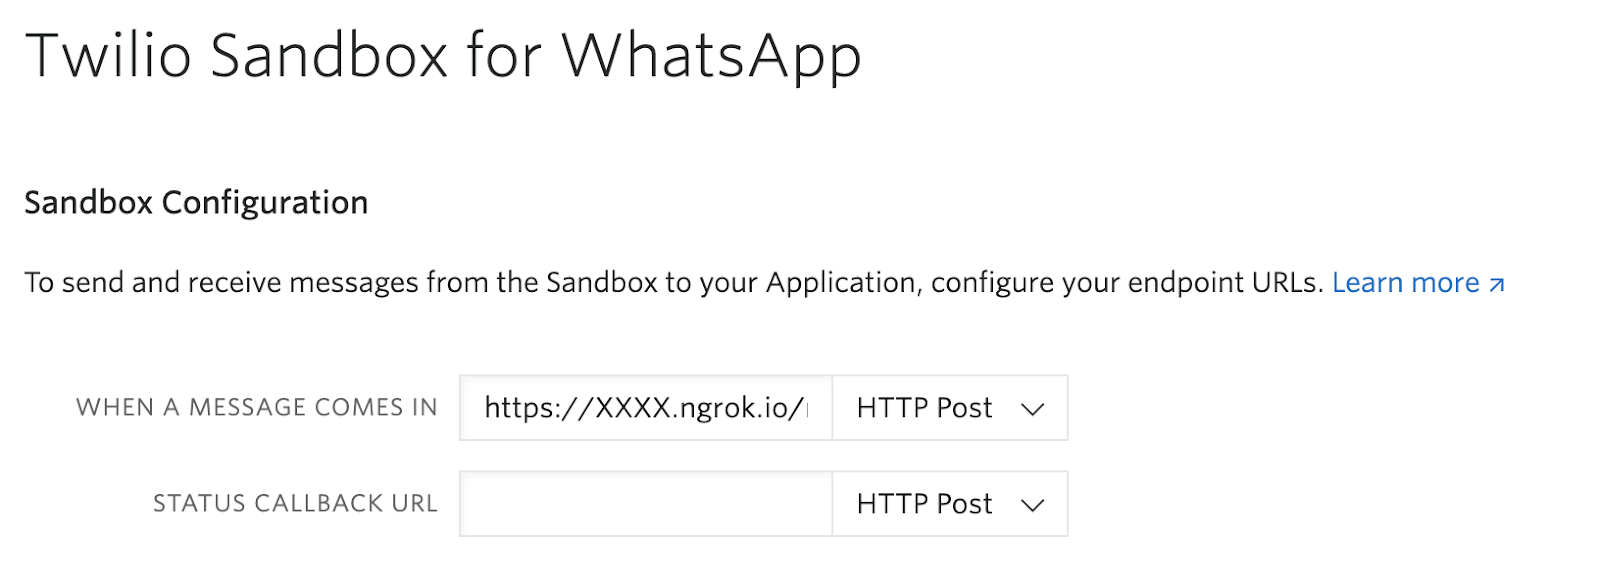 image of the sandbox configuration where you must paste your ngrok link for "When a message comes in"